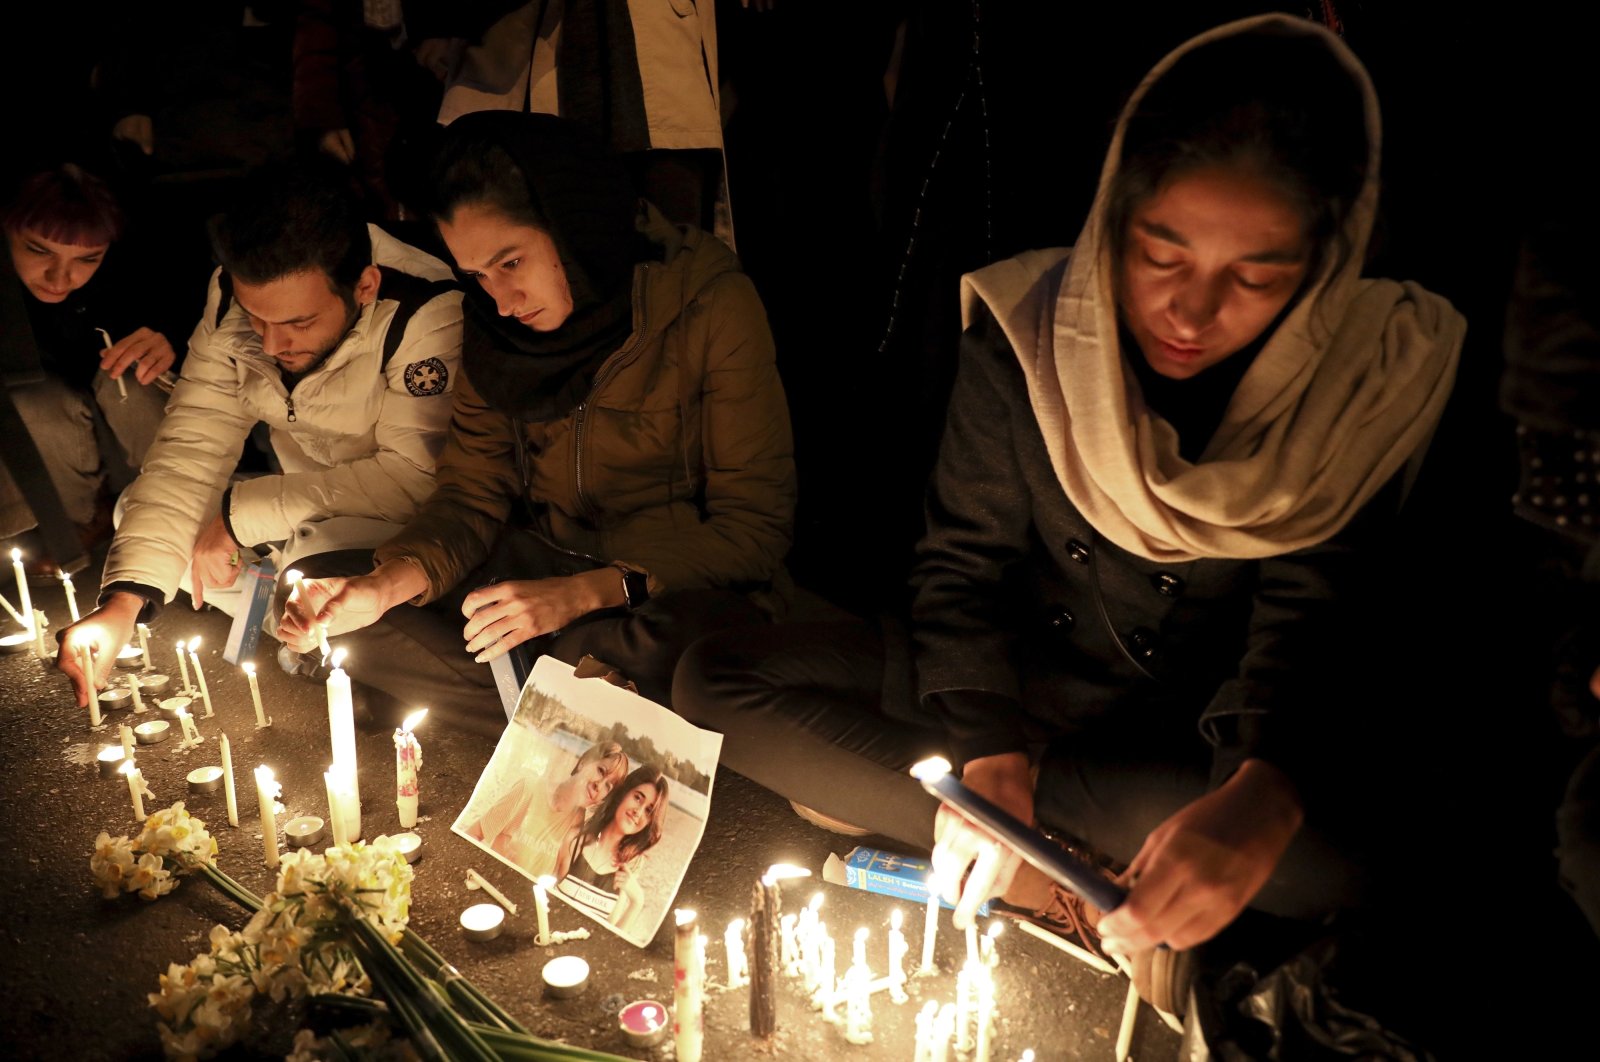 In this Jan. 11, 2020 file photo, people gather for a candlelight vigil to remember the victims of a Ukraine plane crash, at the gate of Amri Kabir University that some of the victims of the crash were former students of, in Tehran, Iran. (AP Photo)